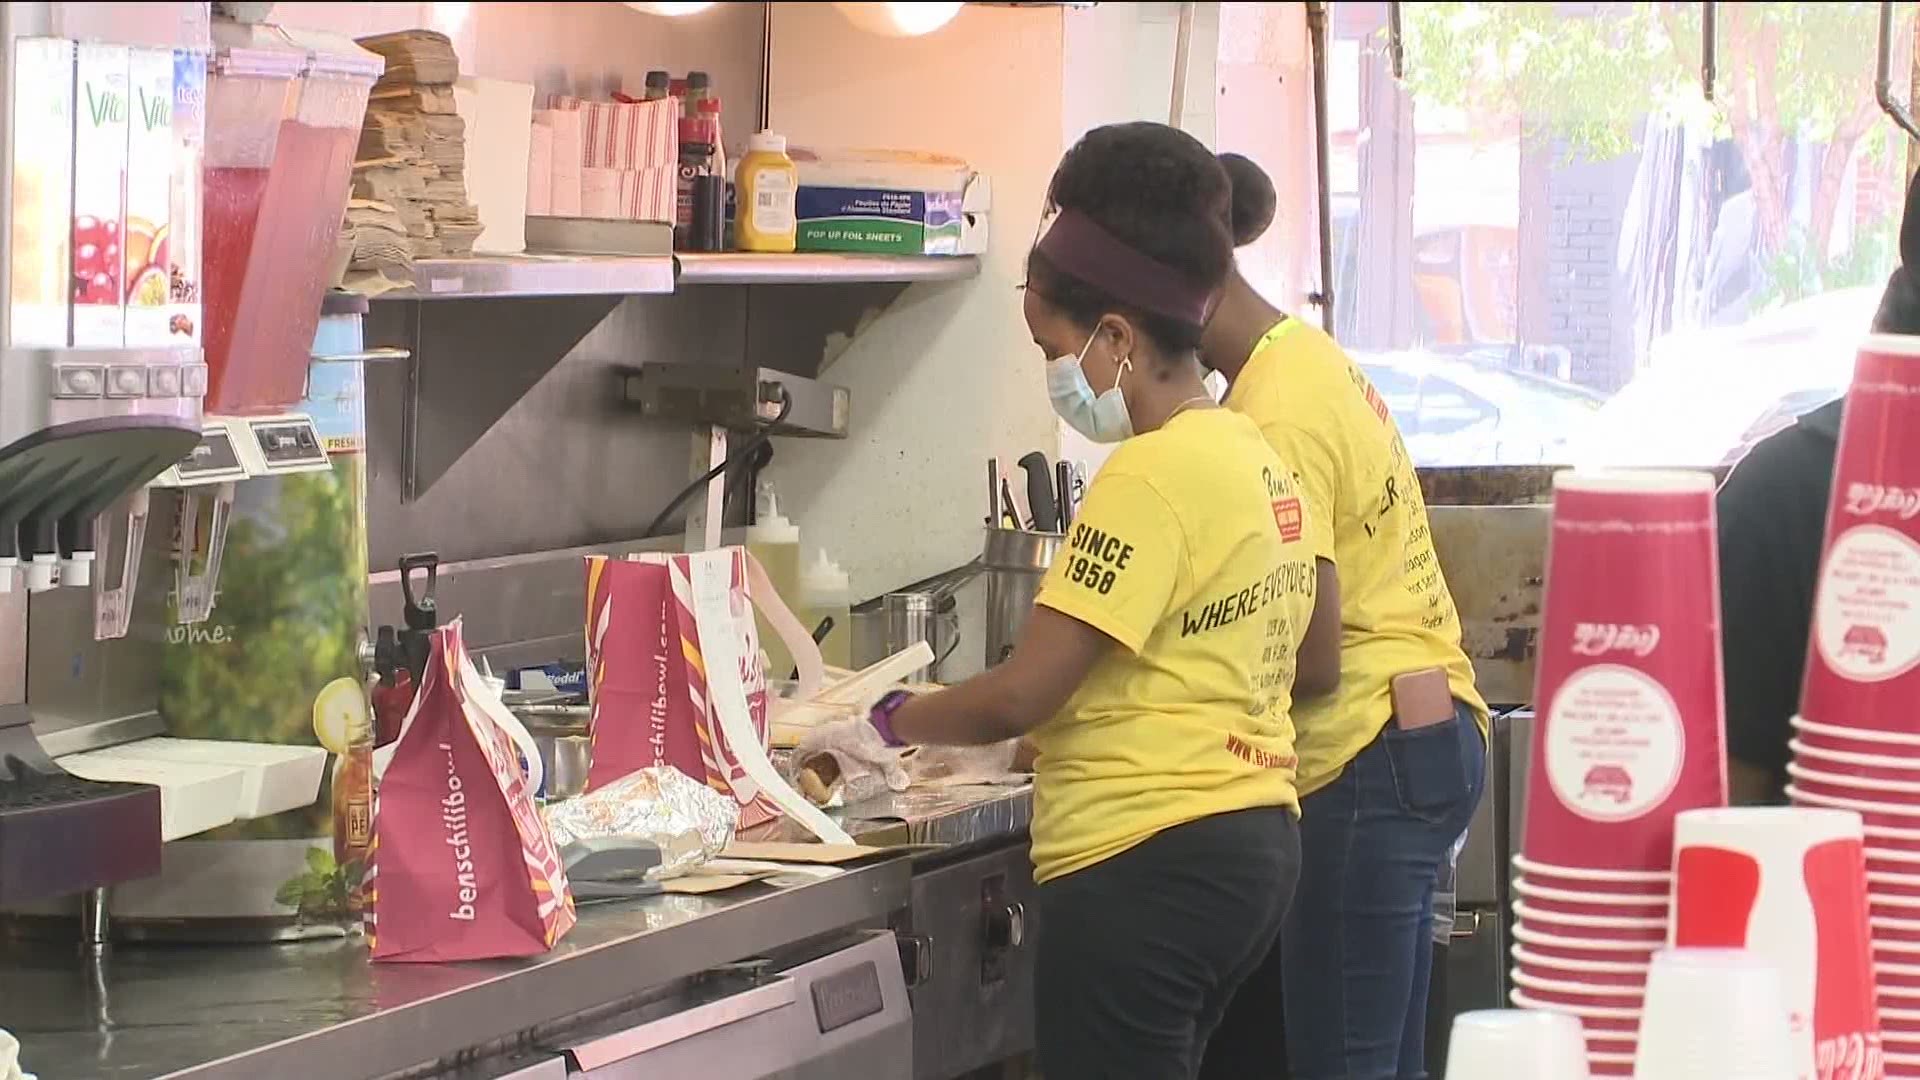 Ben's Chili Bowl, a historically Black-owned restaurant, is paying tribute in their own way.